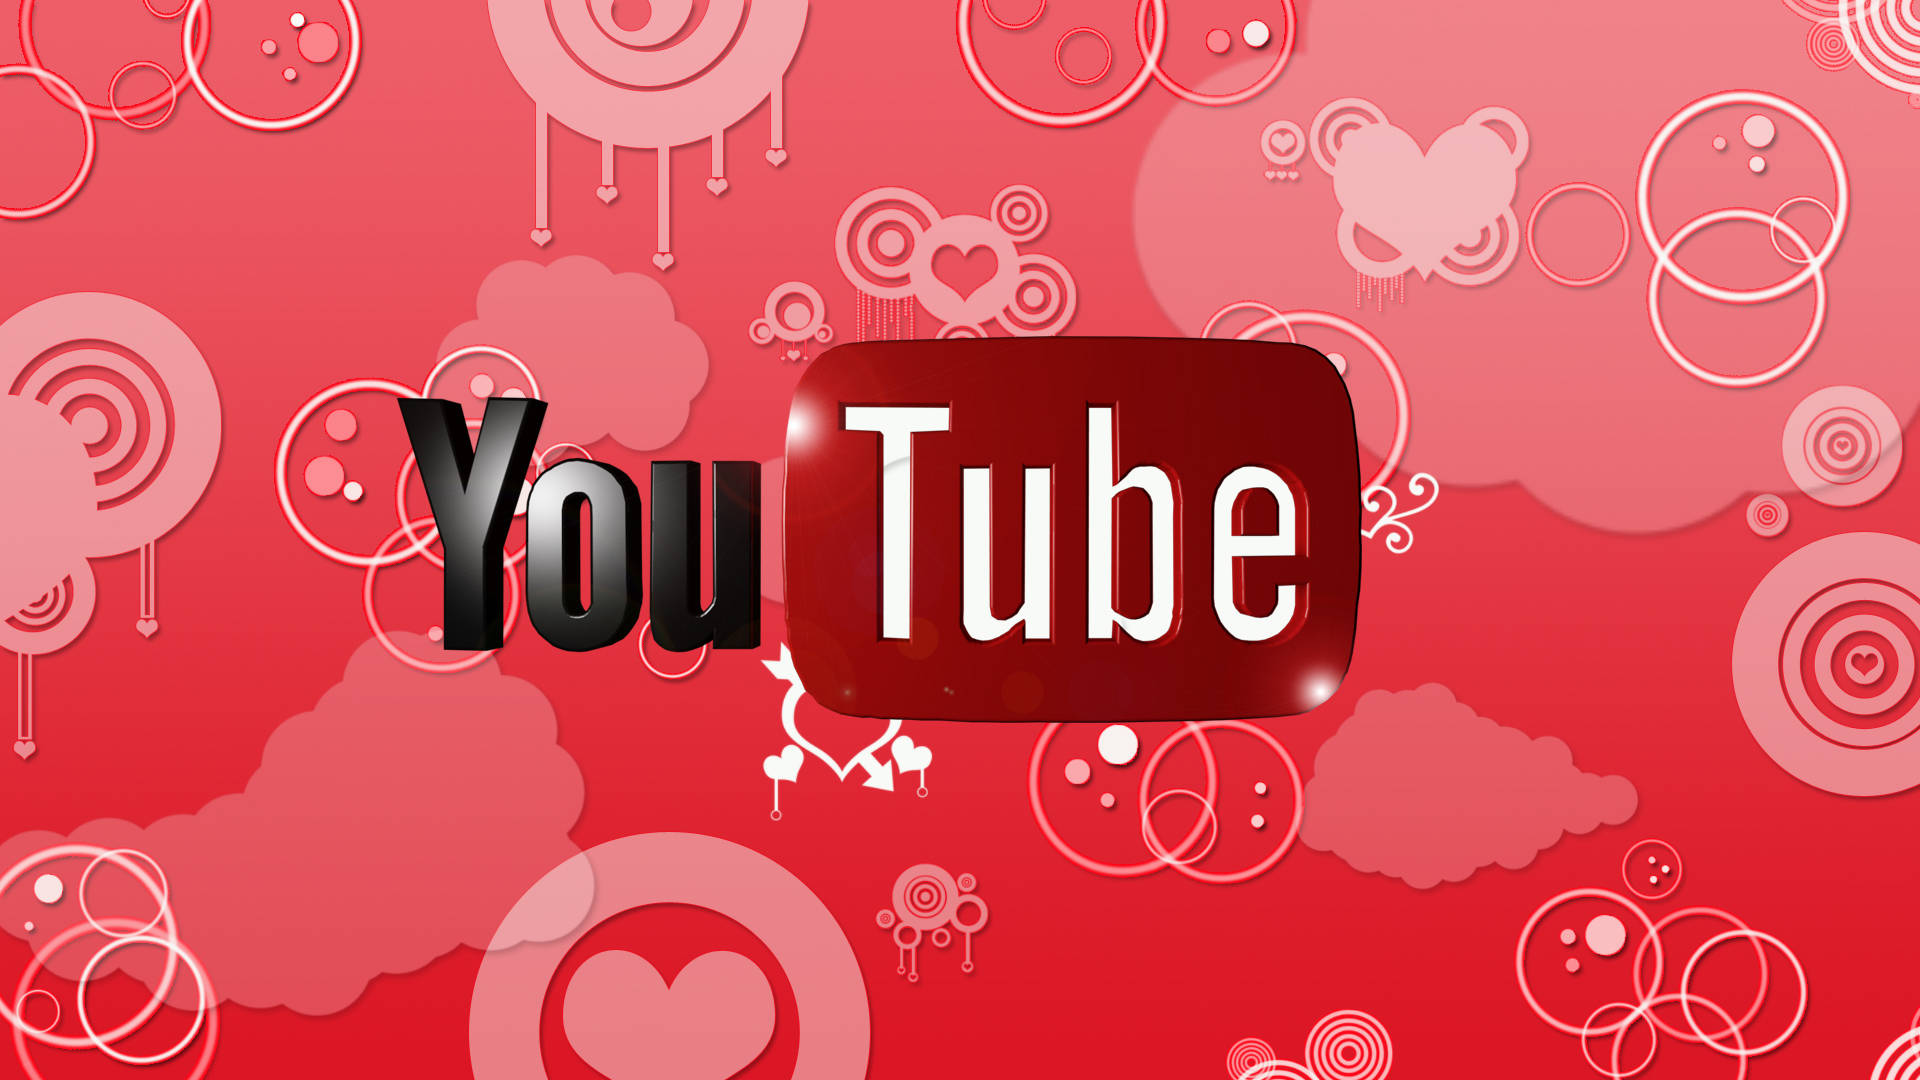 Youtube Red Hearts And Circles Background